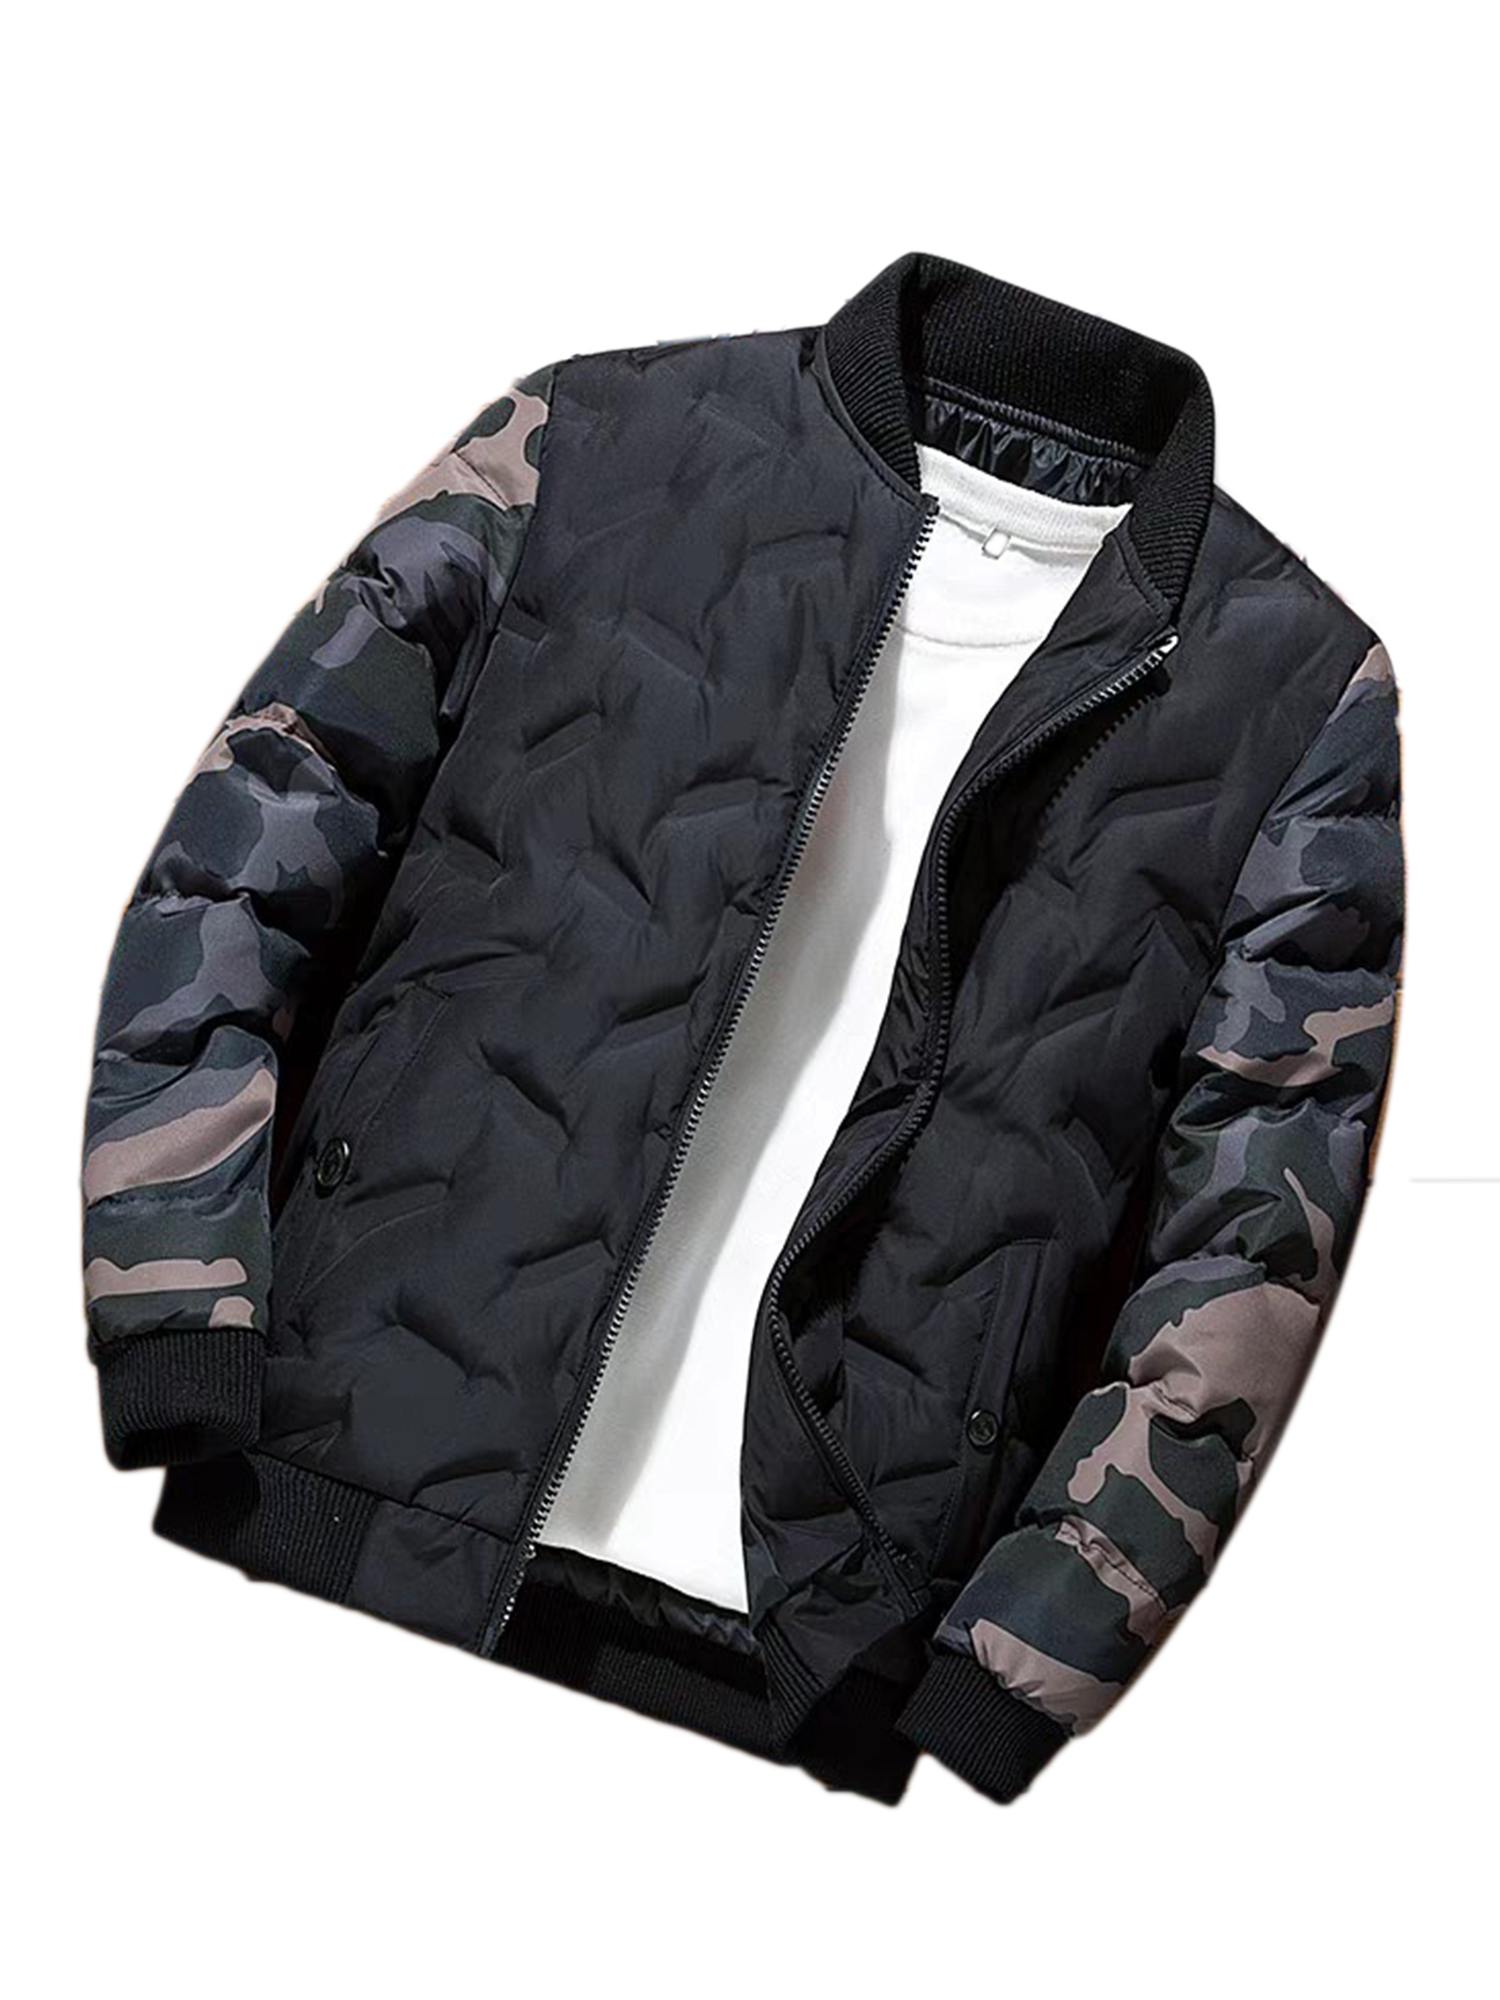 UKAP Mens Full Zip Up Insulated Bomber Jacket Warm Varsity Jacket with Camo Sleeves Stand Collar for Fall Winter - image 1 of 6